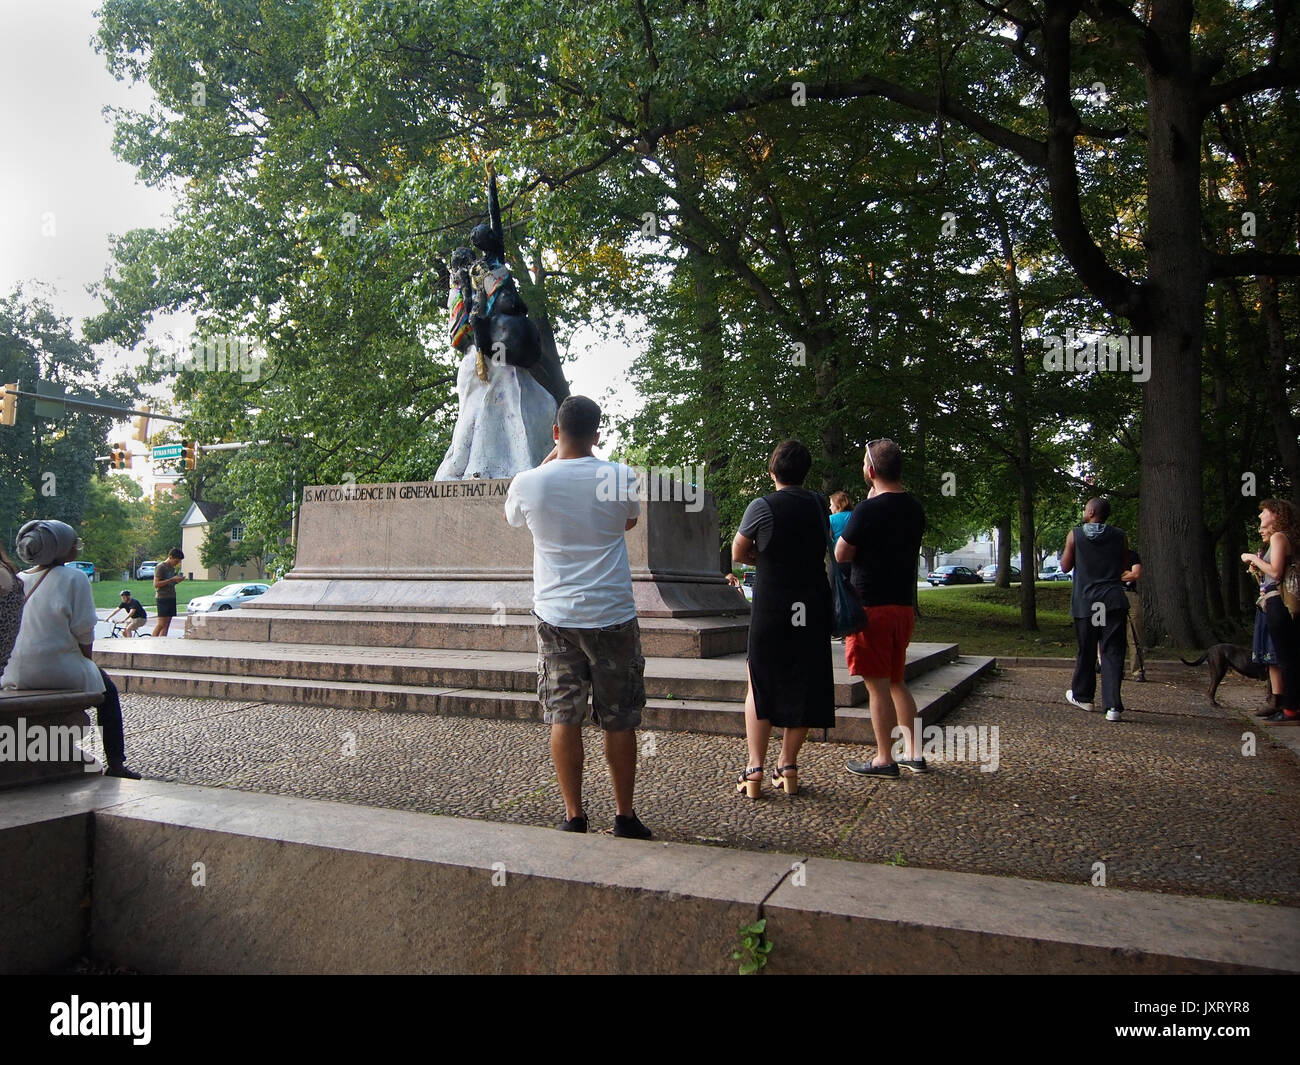 Baltimore, Maryland, USA. 16th Aug, 2017. A crowd gathers around the site where a confederate statue of Robert E. Lee and Stonewall Jackson was removed during the night by city officials. A statue by local artist Pablo Machiolo suddenly stands in it's place. Credit: Cheryl Moulton/Alamy Live News Stock Photo